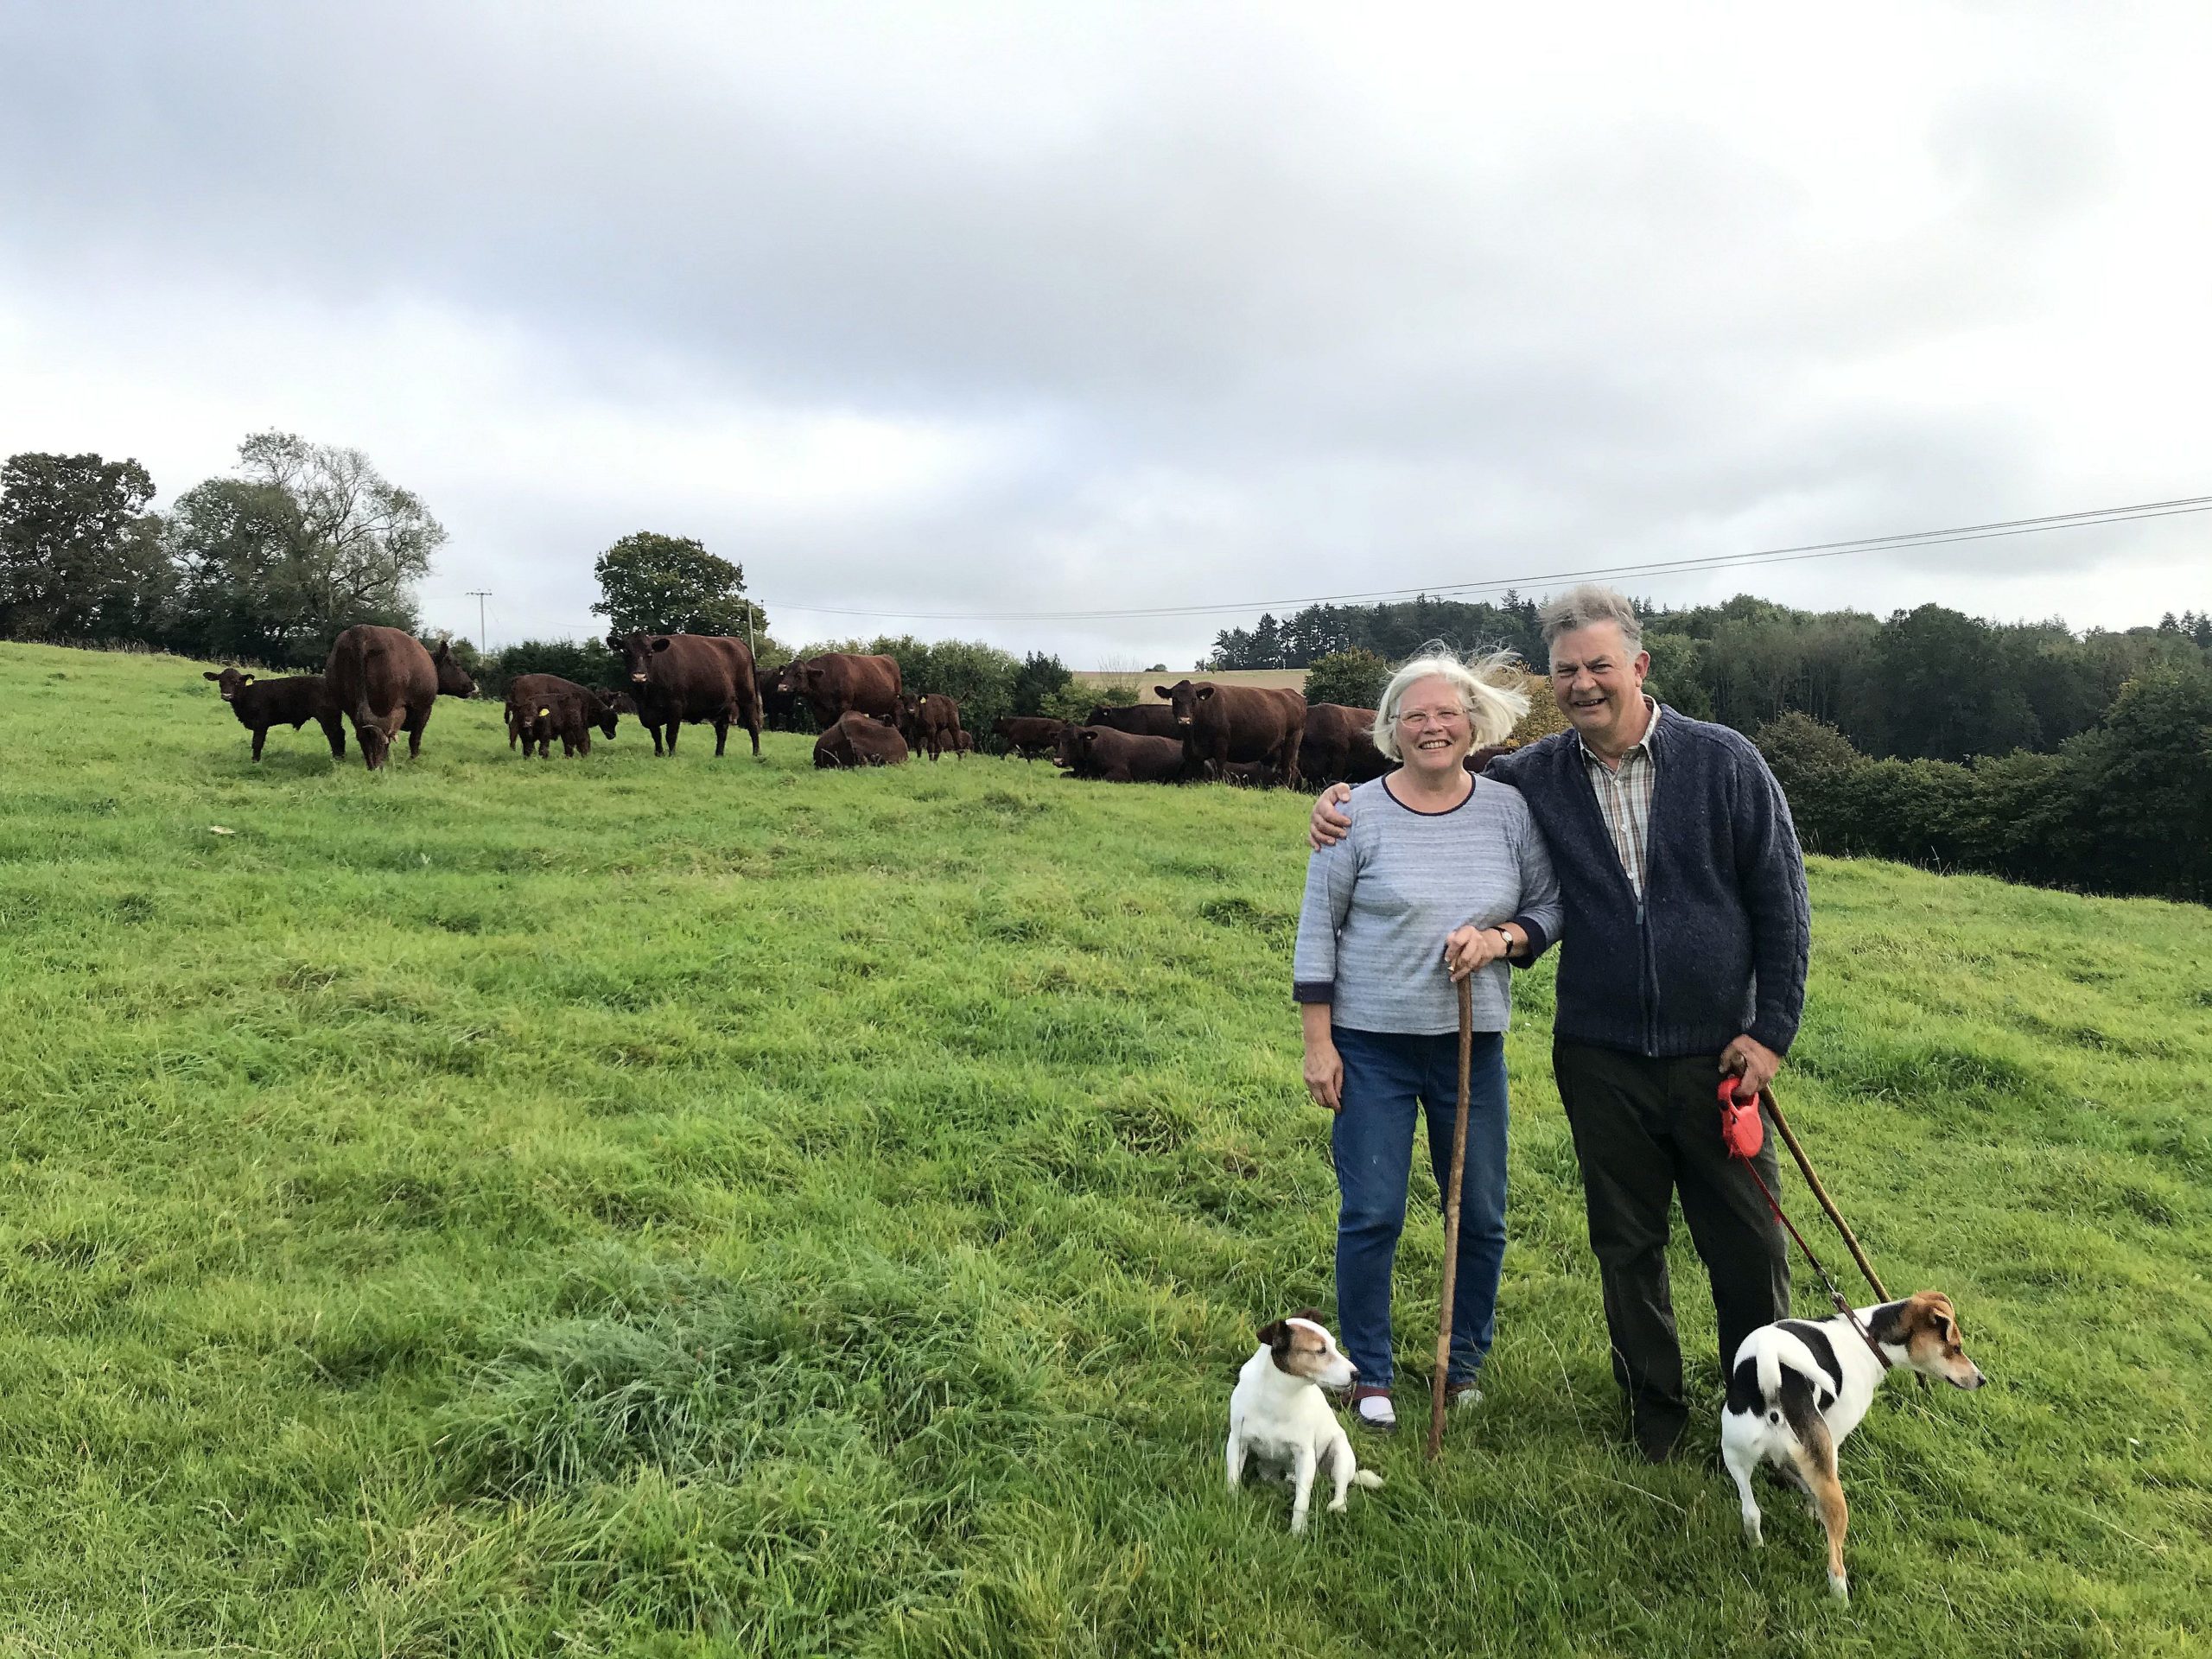 Maggie and Quentin Edwards of Cools Farm in East Knoyle 